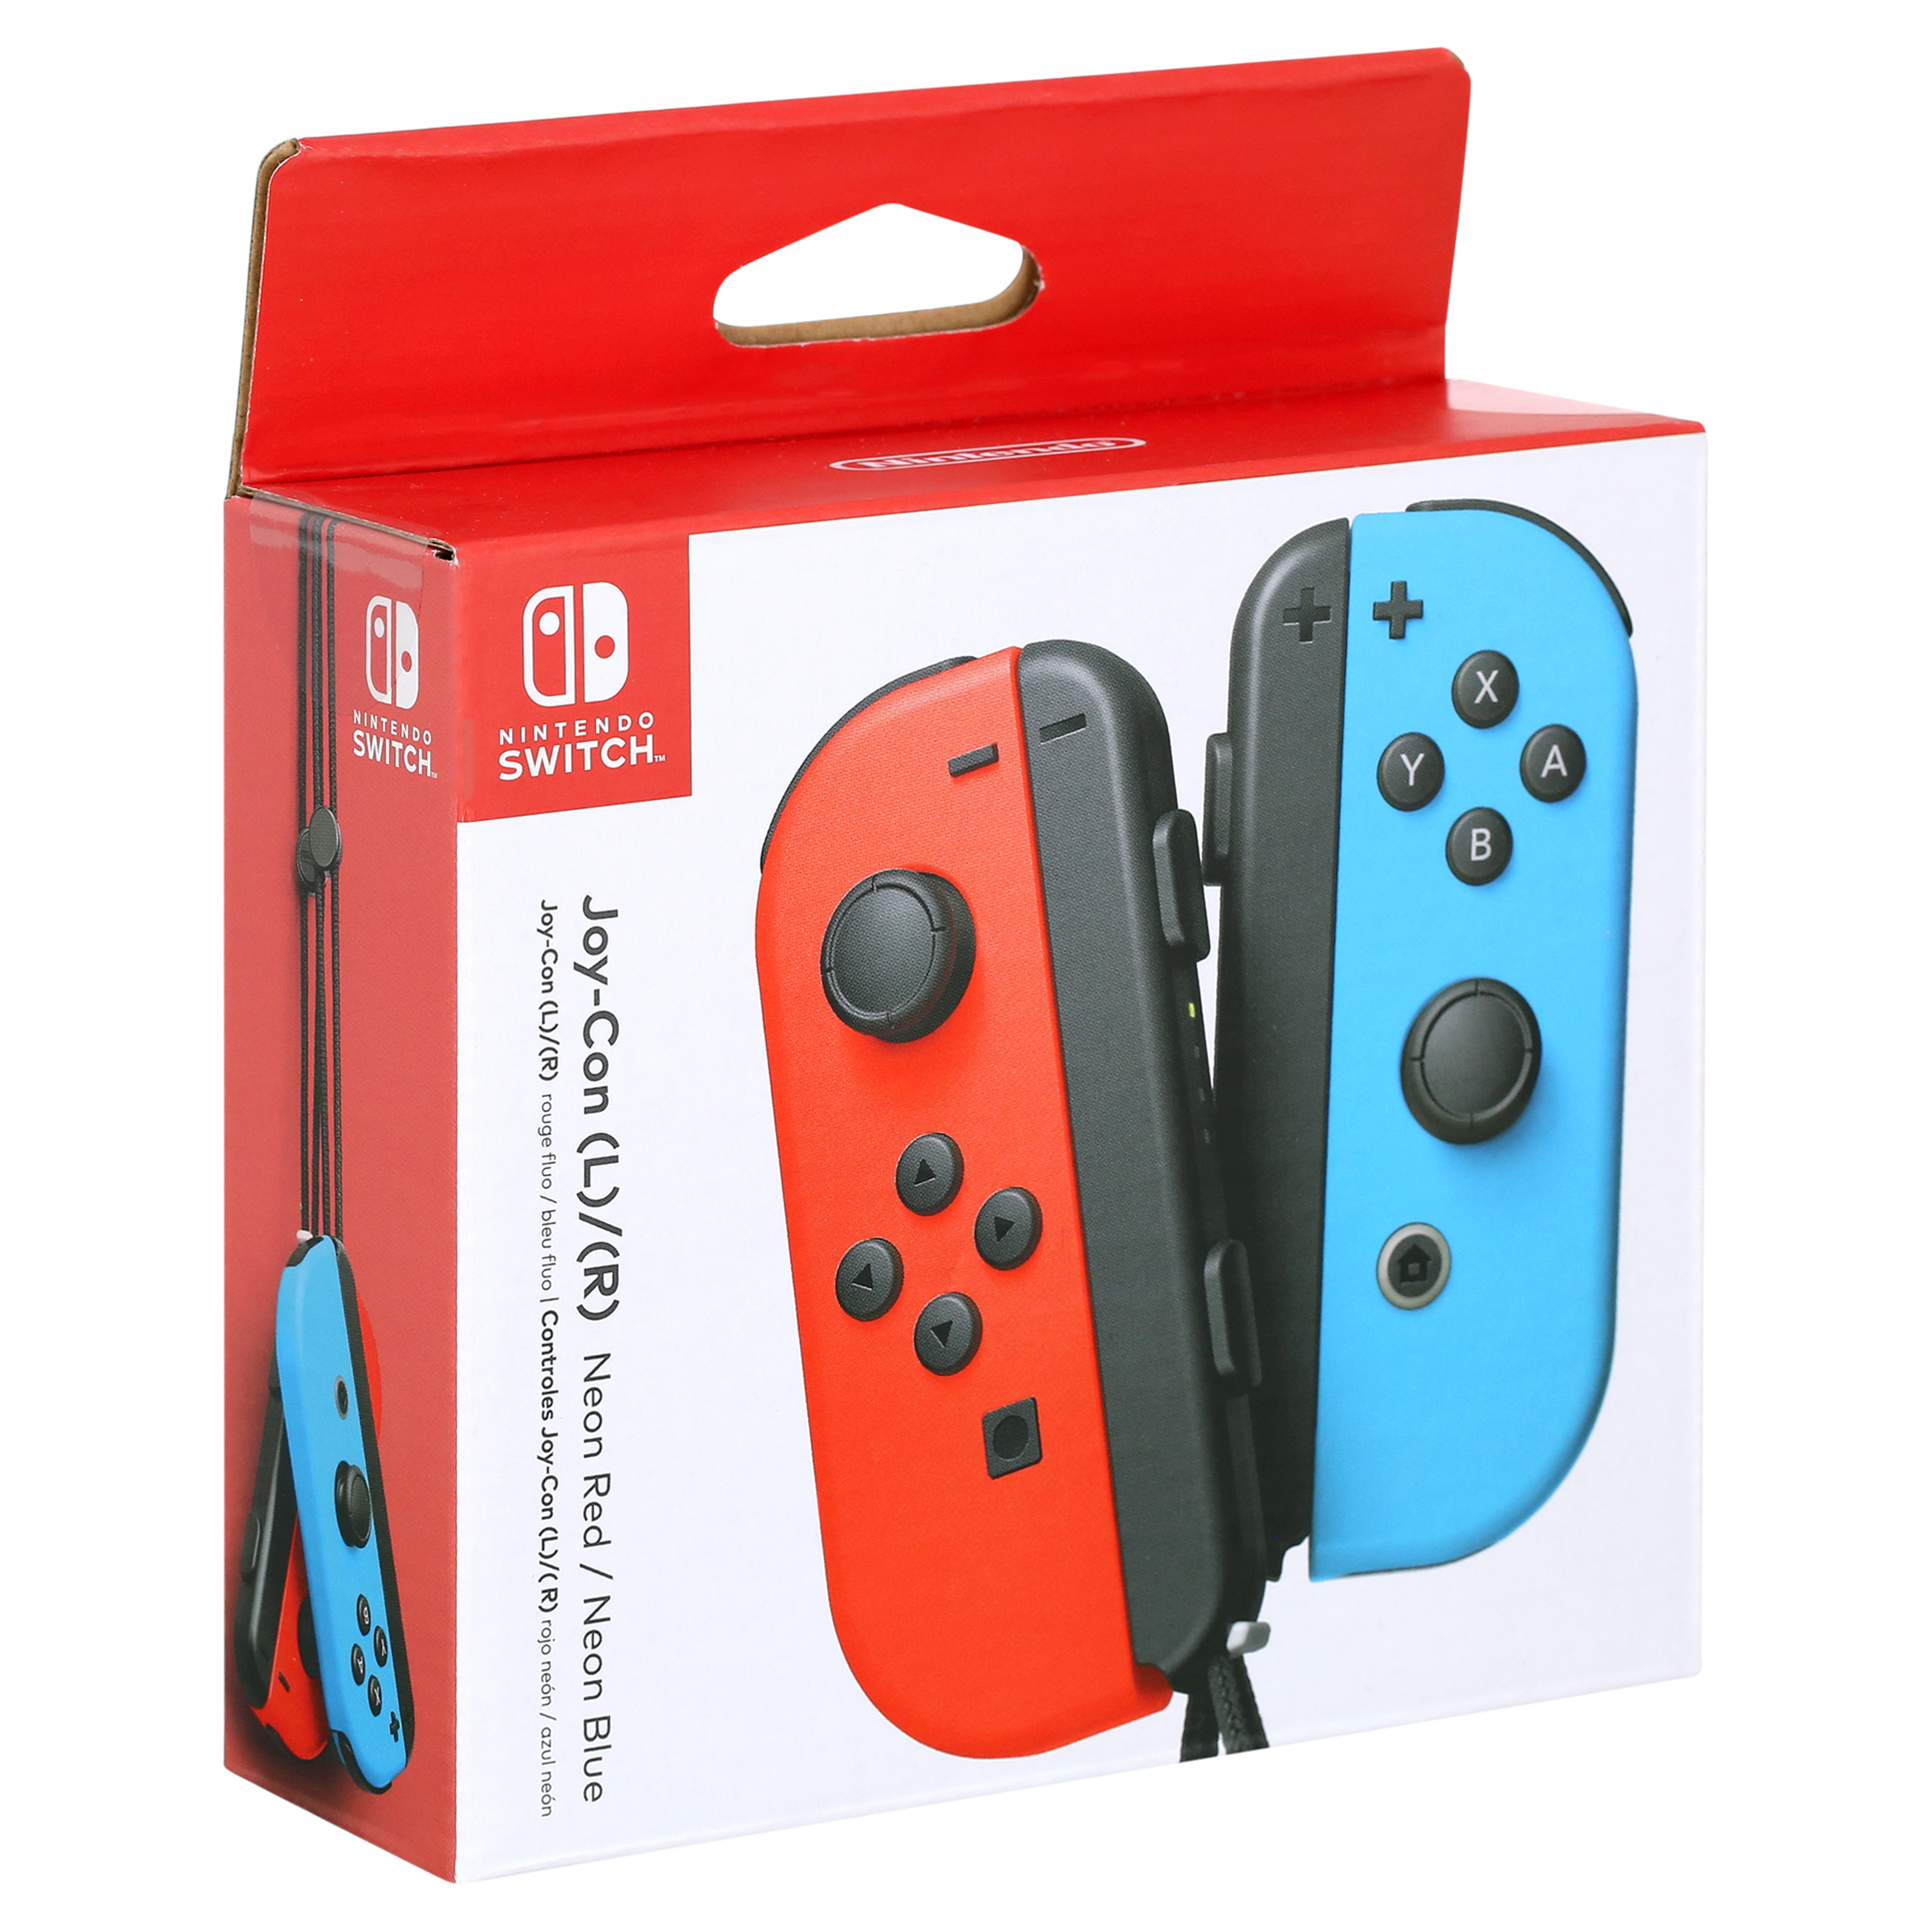 Nintendo Switch - Joy-Con (L/R) - Left Neon Red/ Right Neon Blue Controllers - image 5 of 6